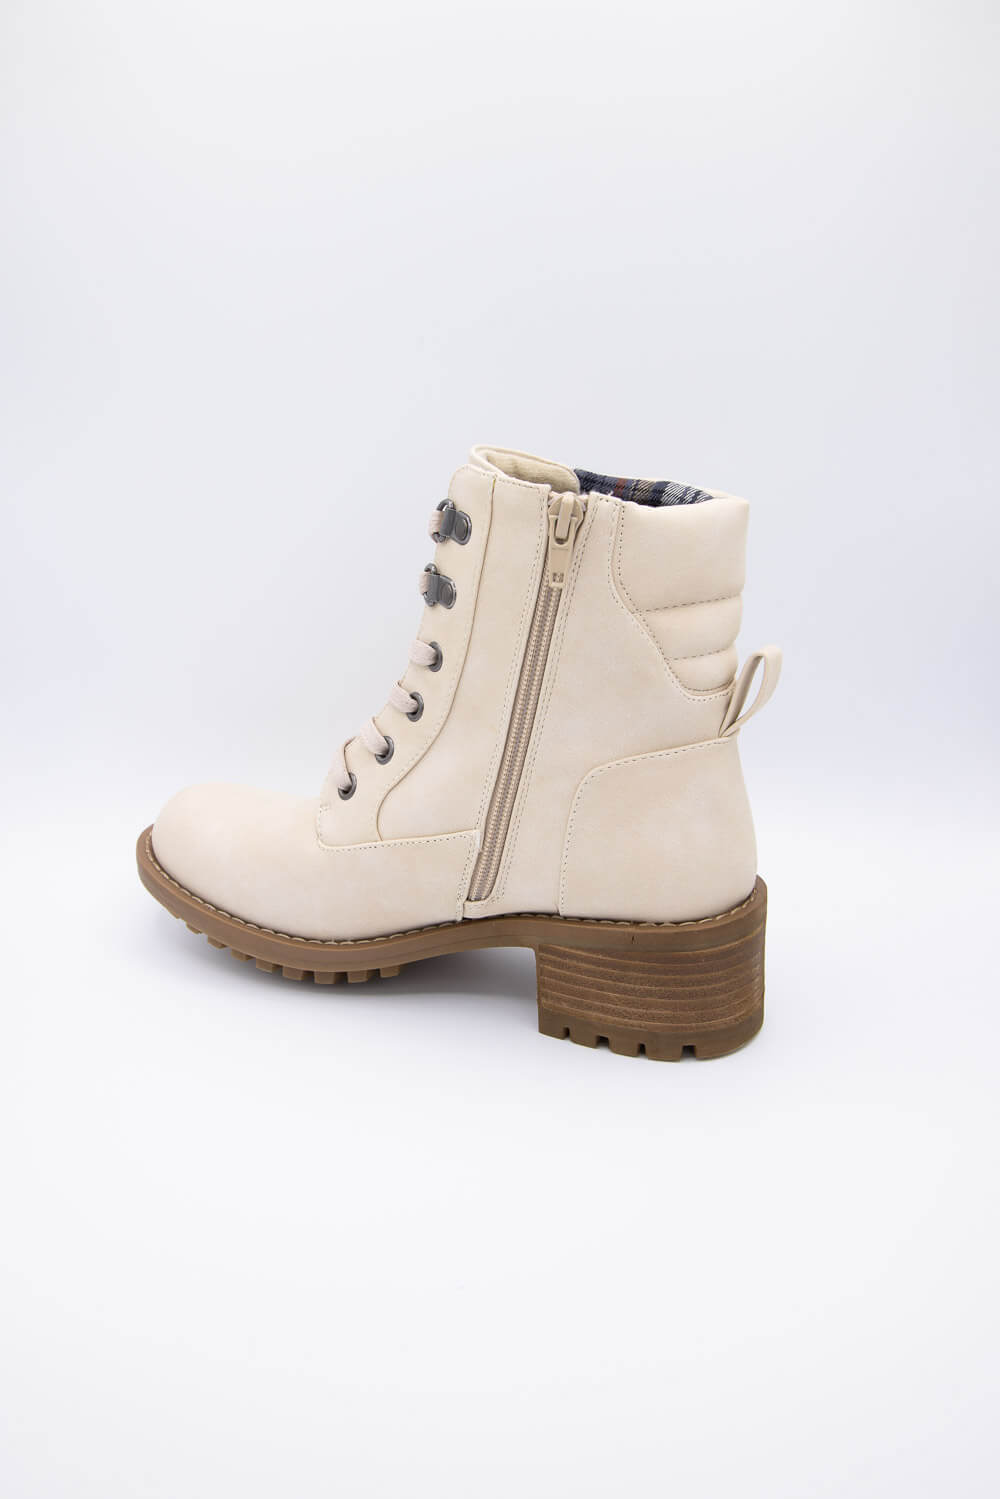 B52 by Bullboxer Lace Up Lug Booties for Women in Light Beige | 199501 ...